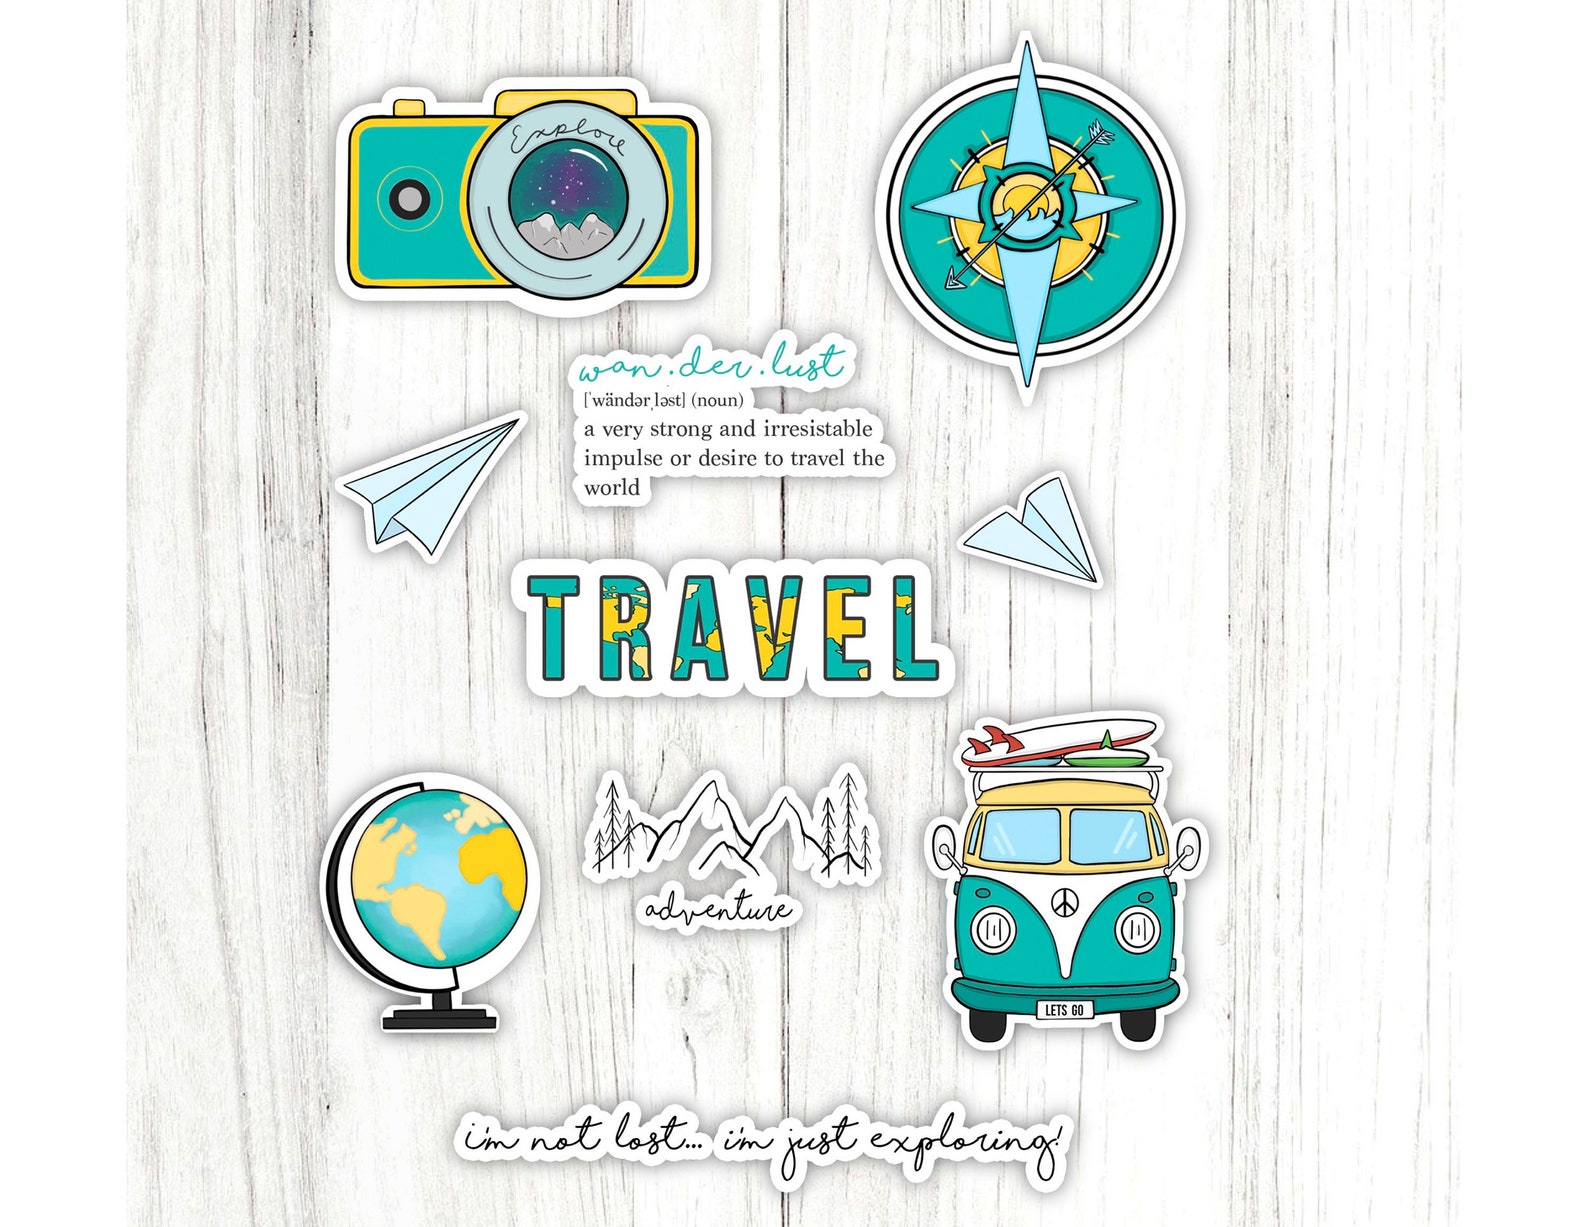 travel stickers images